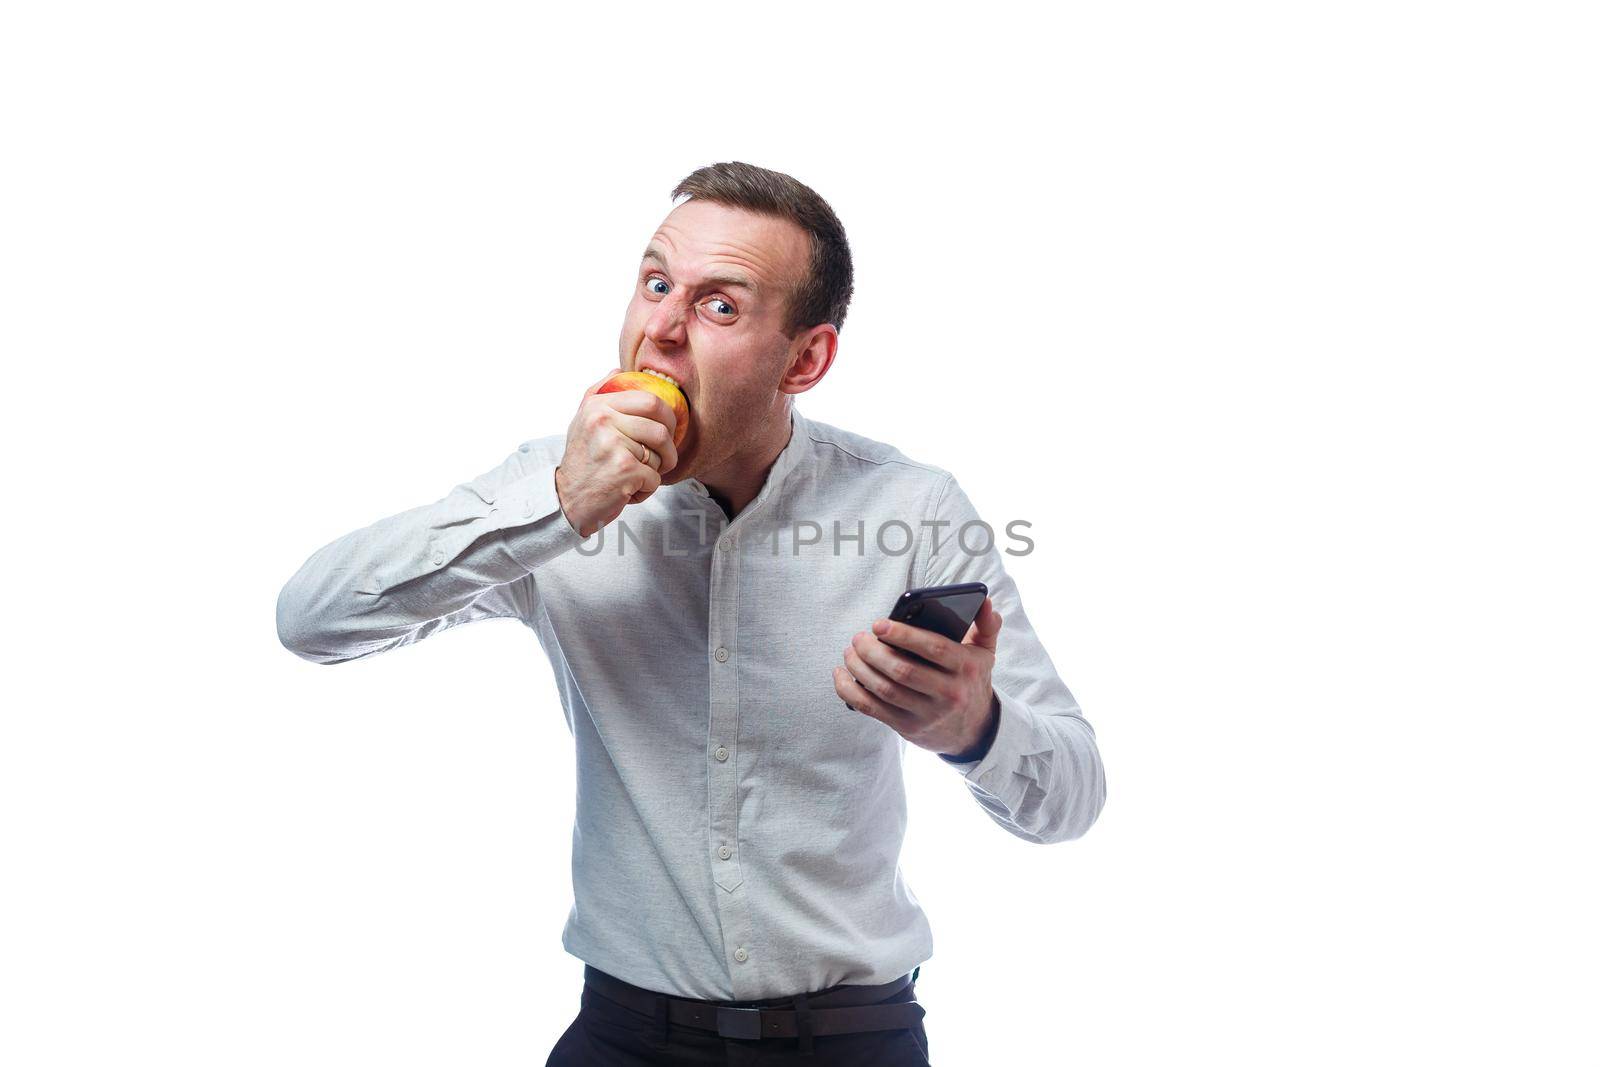 Caucasian male businessman holding a mobile phone in black and holding a red-yellow apple. He is wearing a shirt. Emotional portrait. Isolated on white background